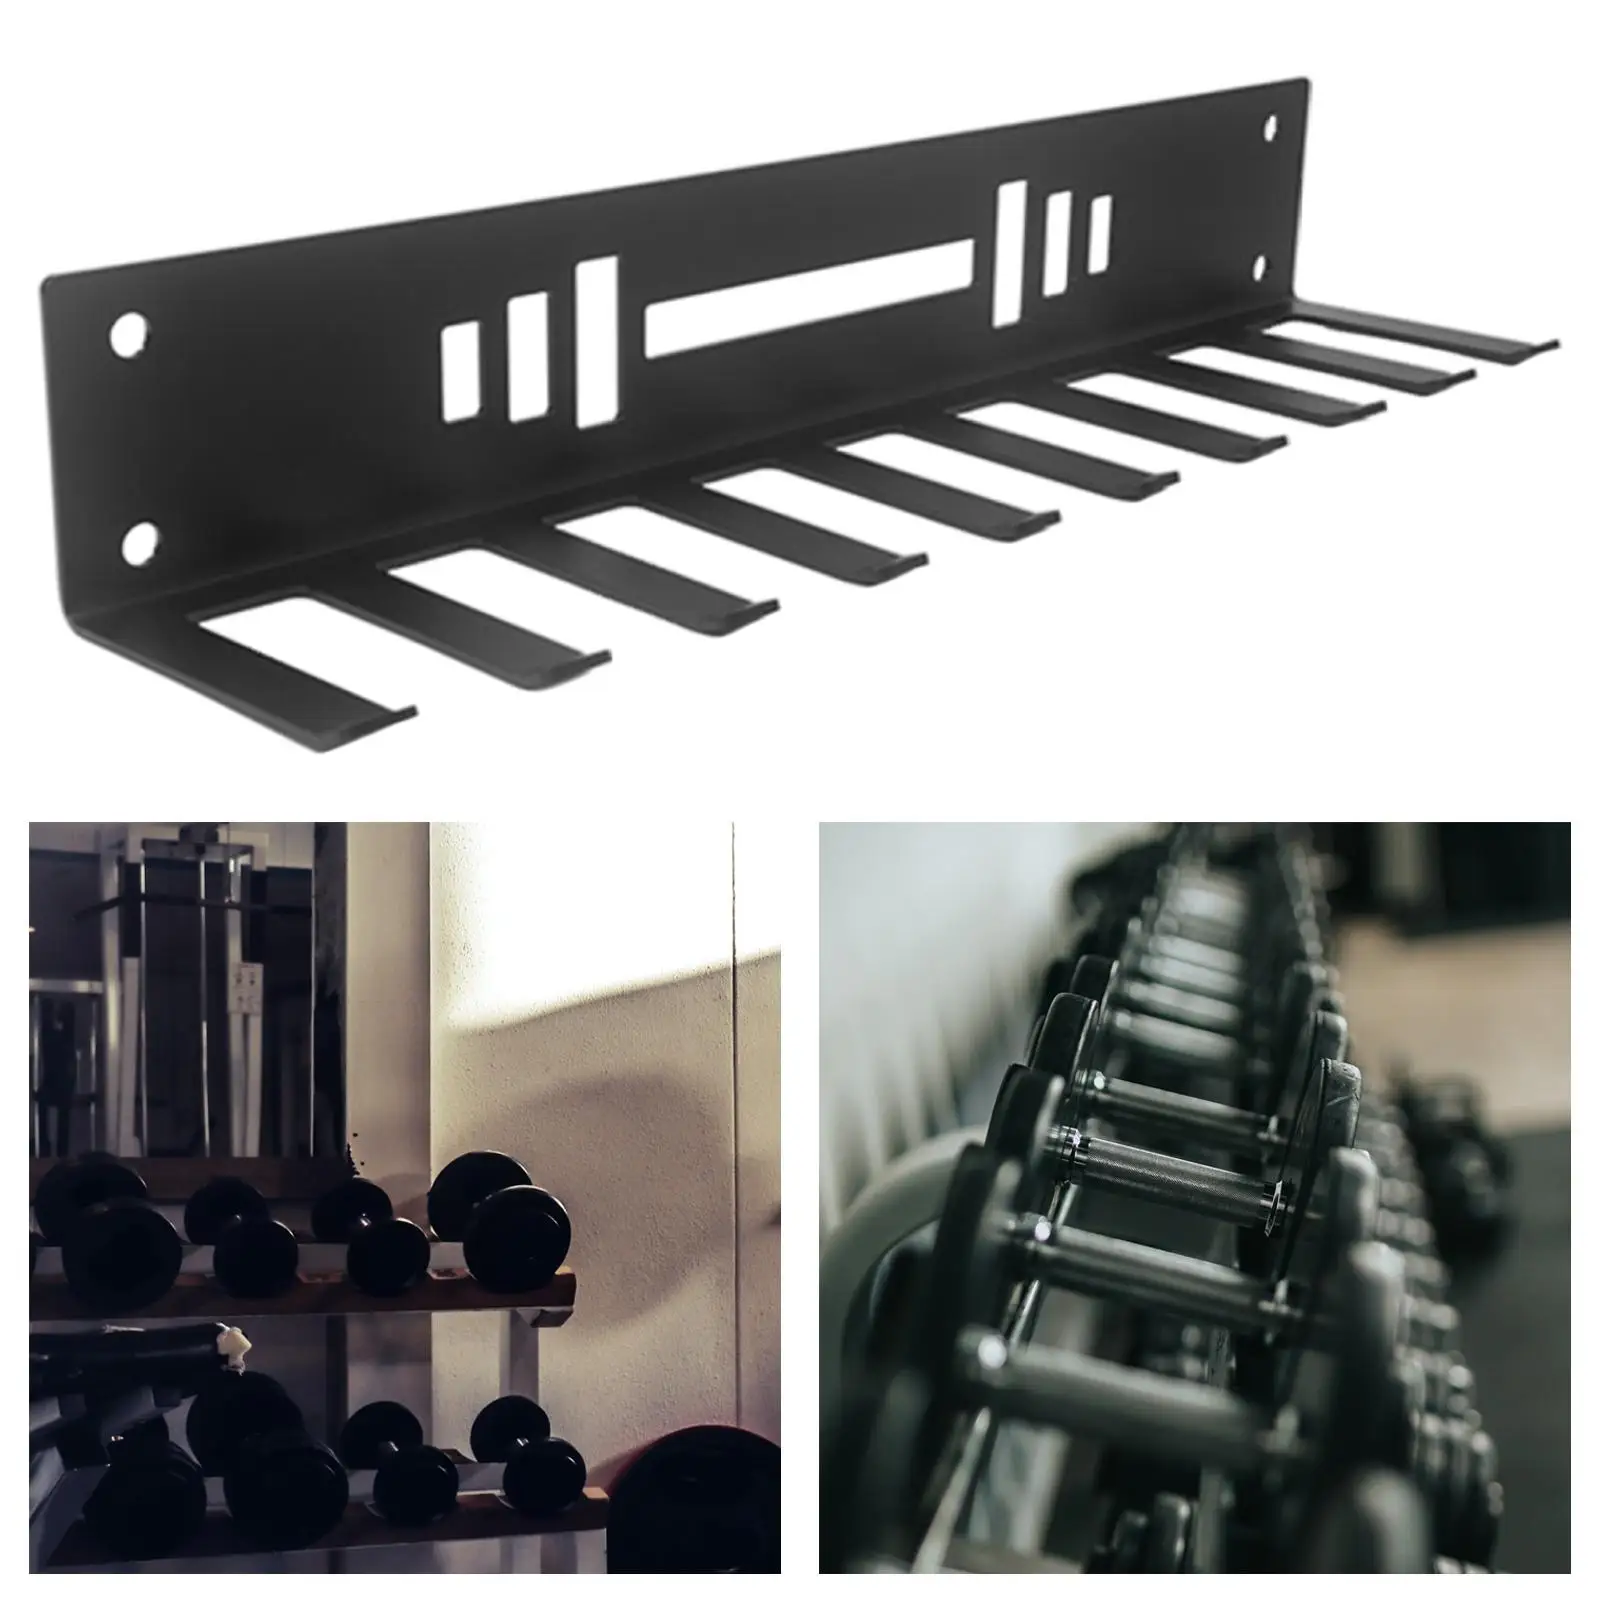 Multi-Purpose Gym Storage Rack Wall Mount Hanger Home Gym Barbell Bands